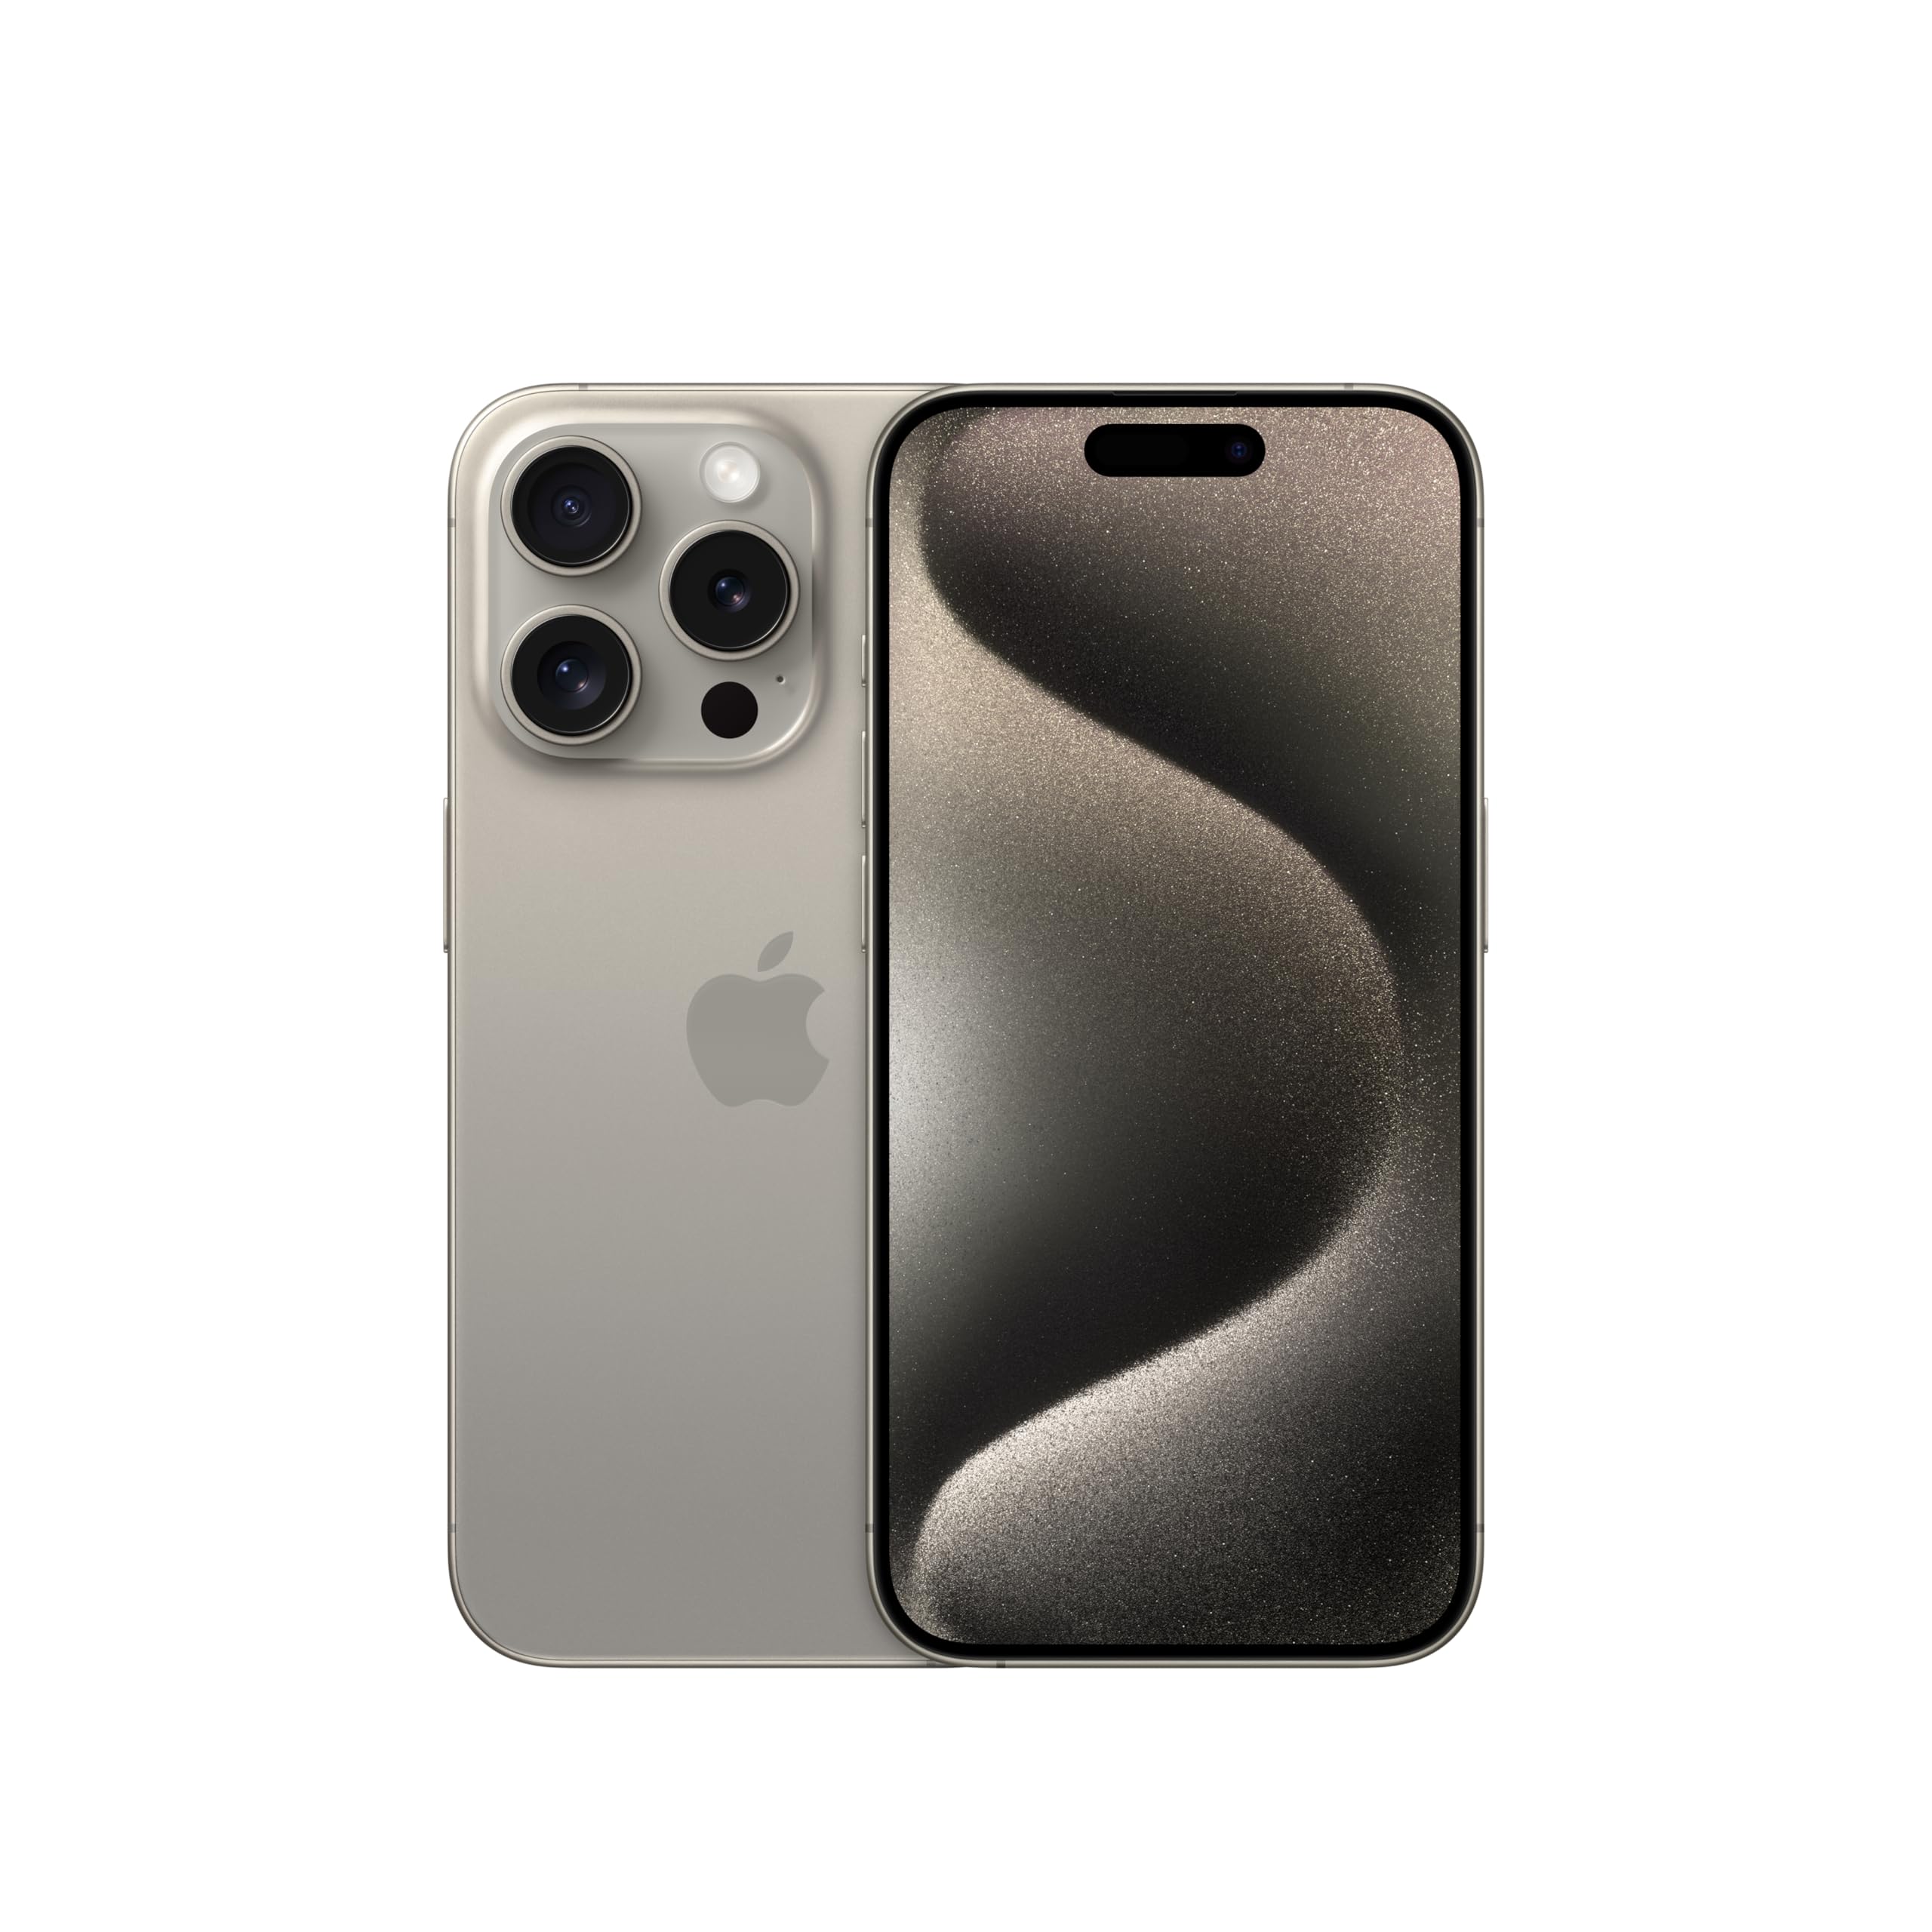 Apple iPhone 15 Pro (256 GB) - Natural Titanium | [Locked] | Boost Infinite plan required starting at $60/mo. | Unlimited Wireless | No trade-in needed to start | Get the latest iPhone every year